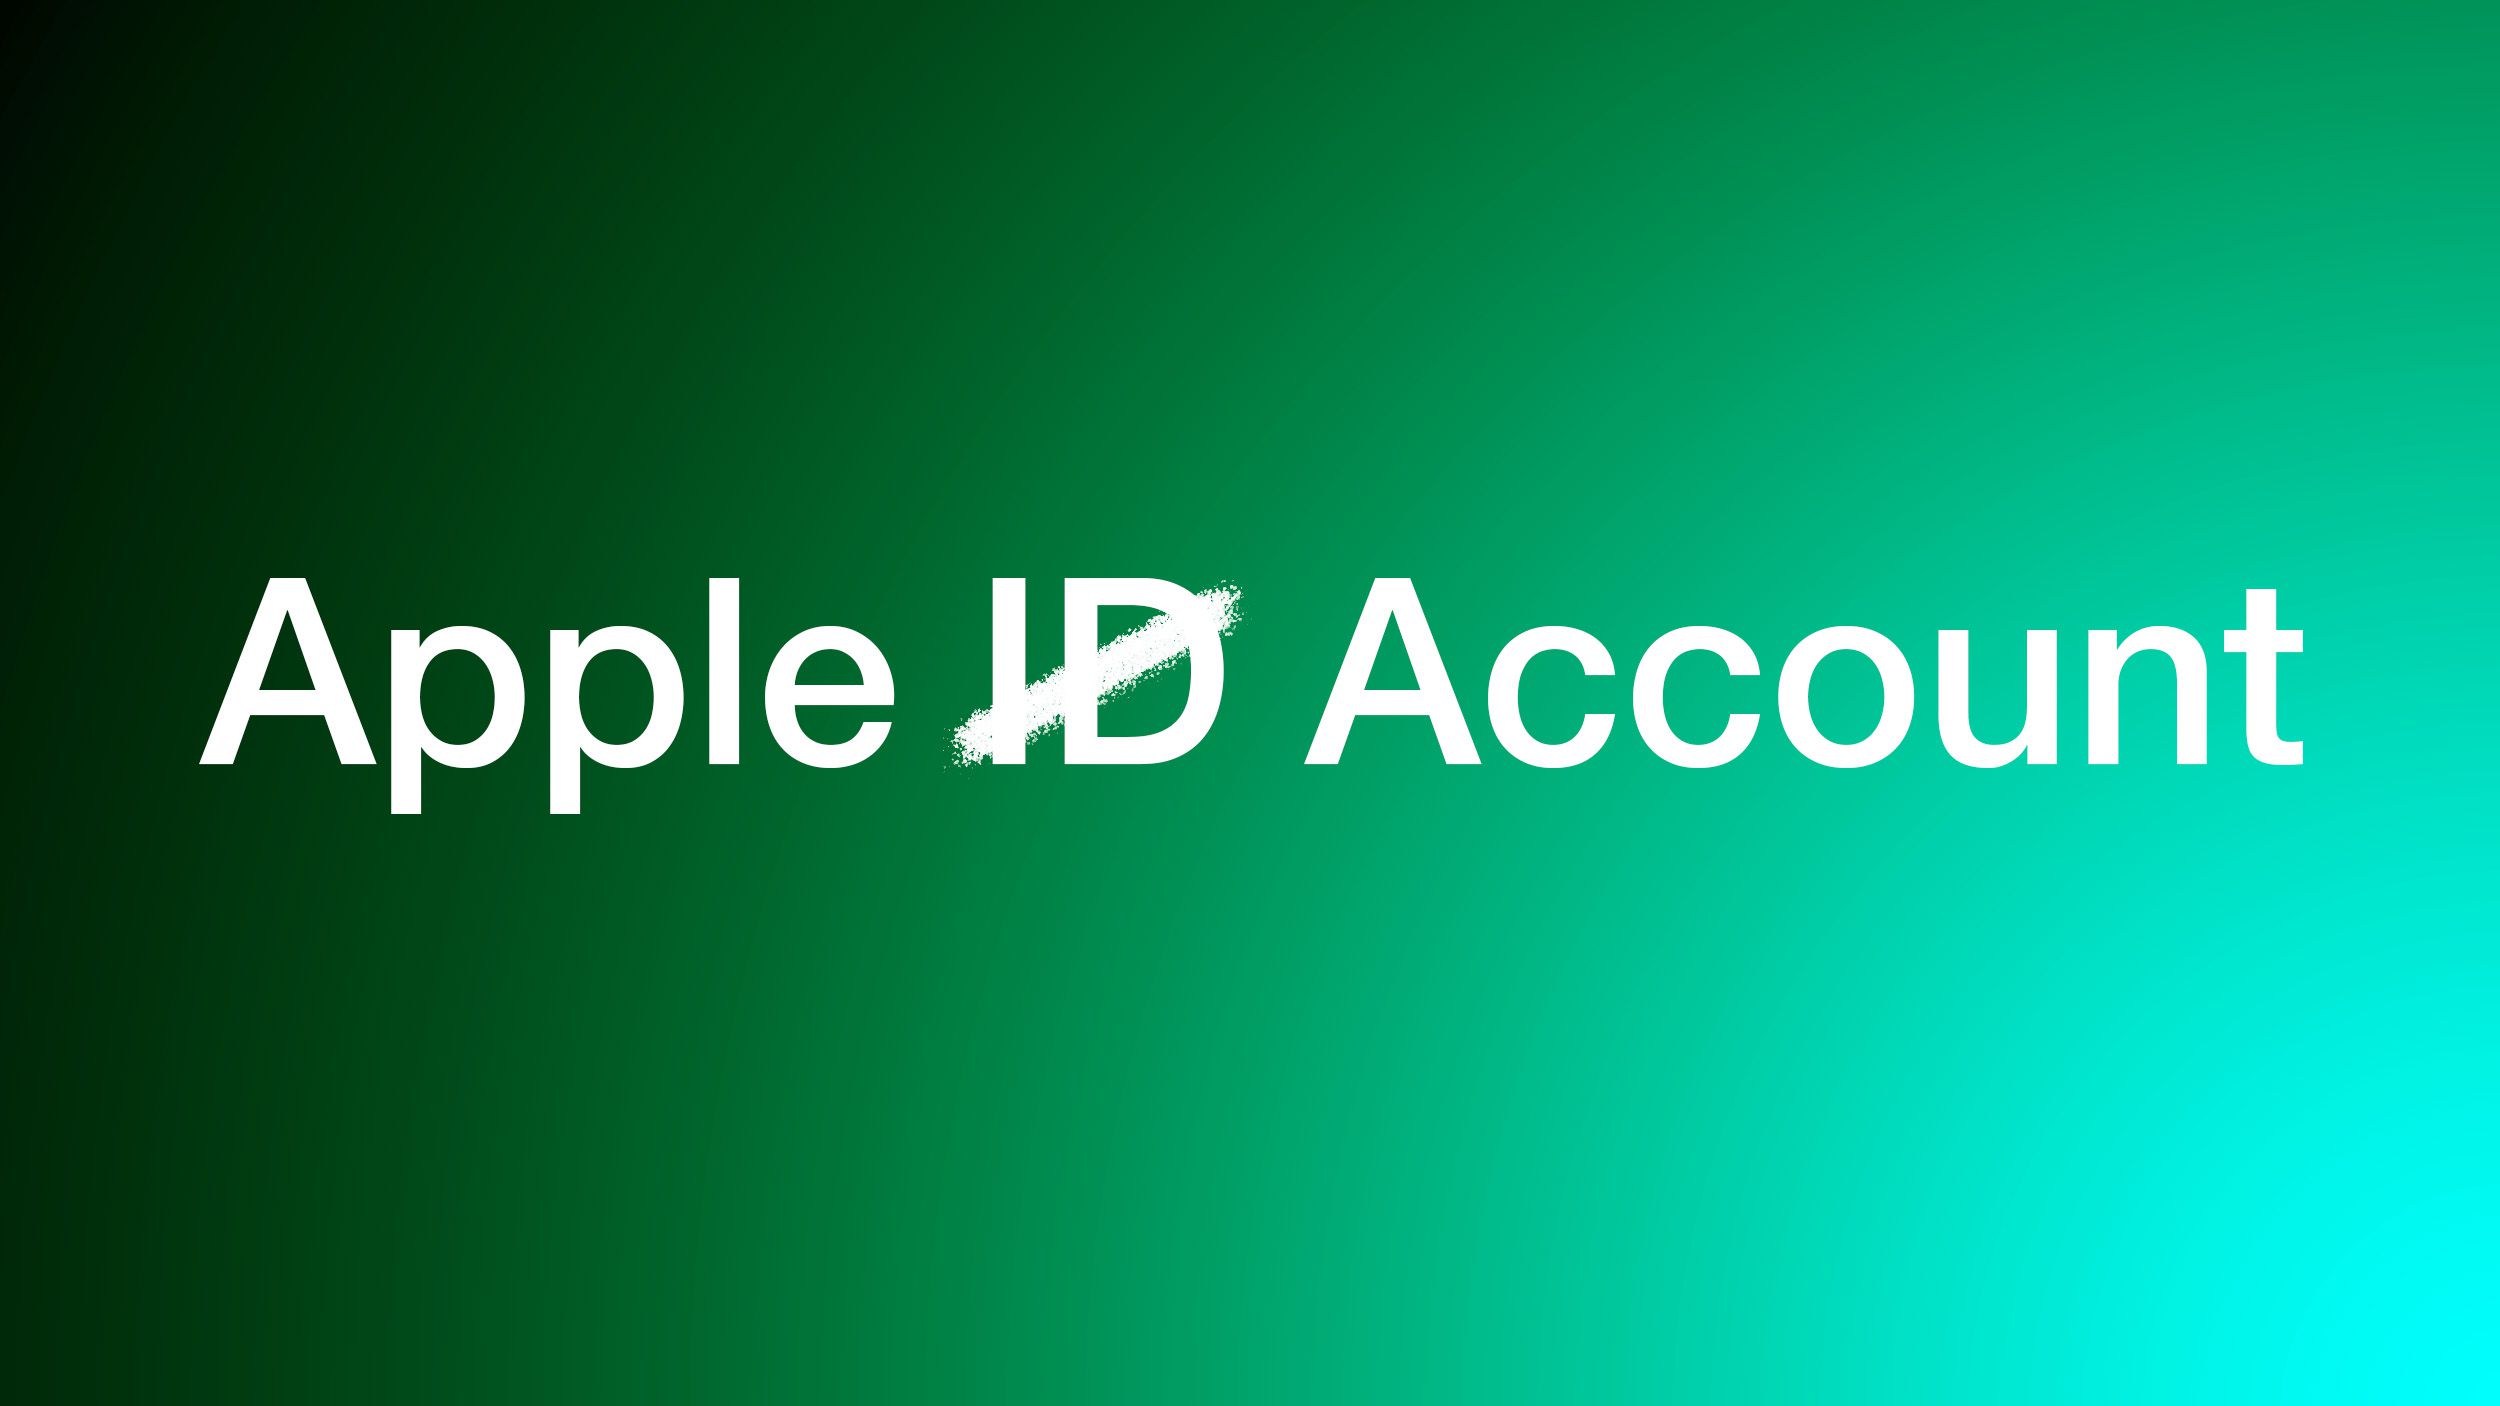 Rumors swirling that Apple ID could undergo name change to ‘Apple Account’